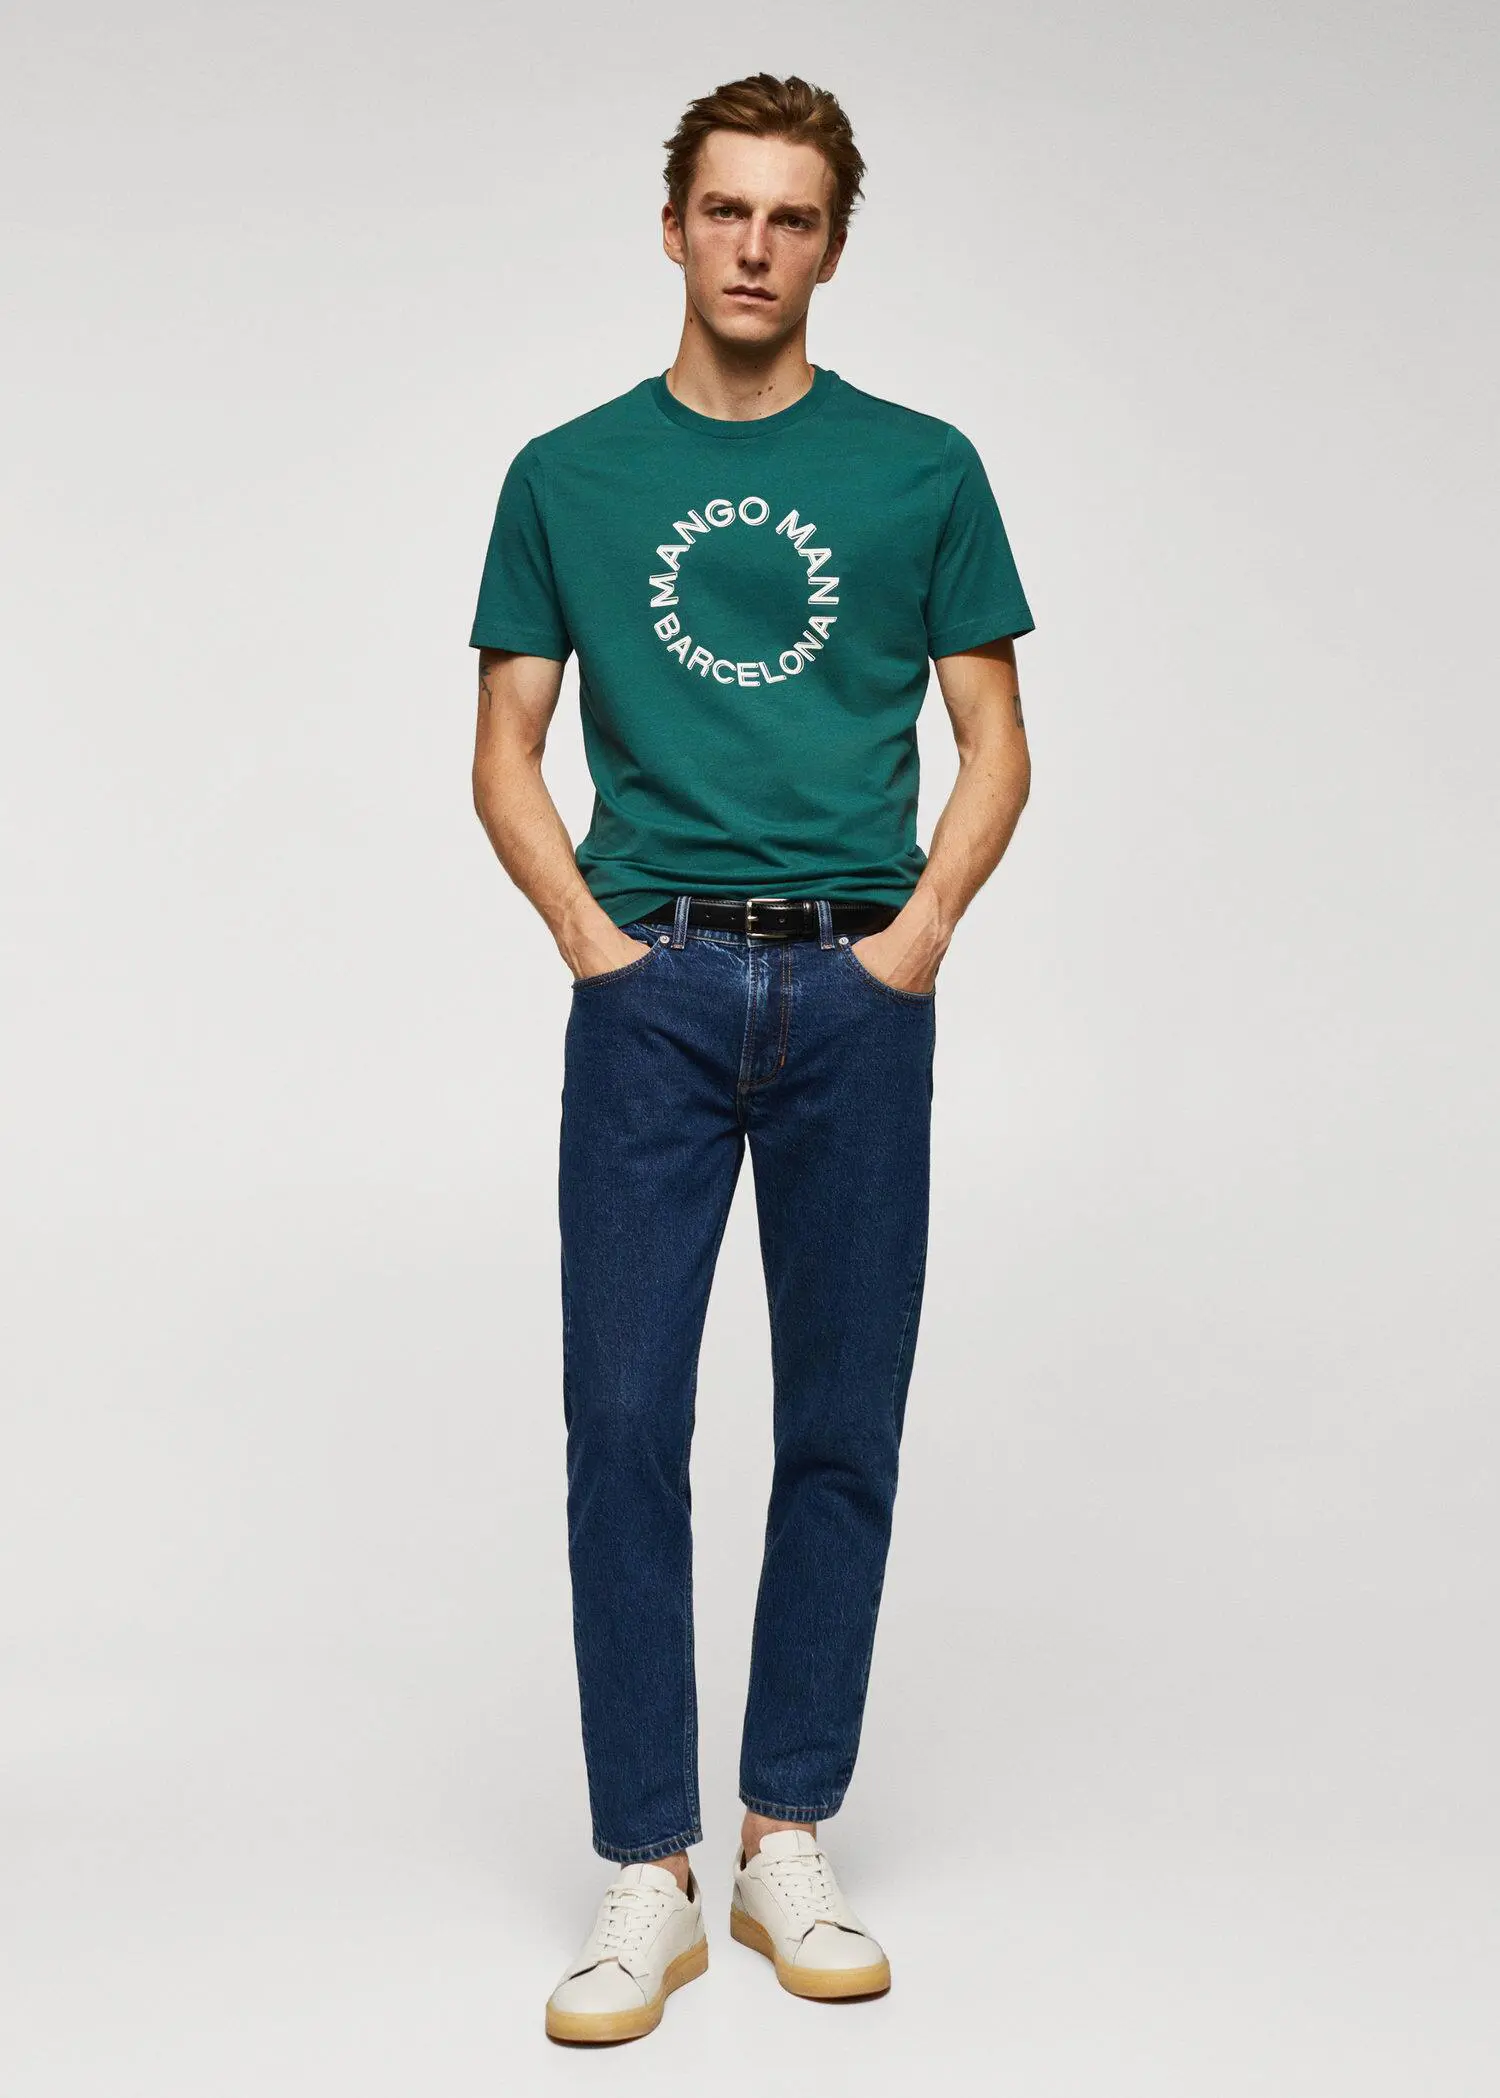 Mango 100% cotton t-shirt with logo. a man in a green t-shirt and blue jeans. 